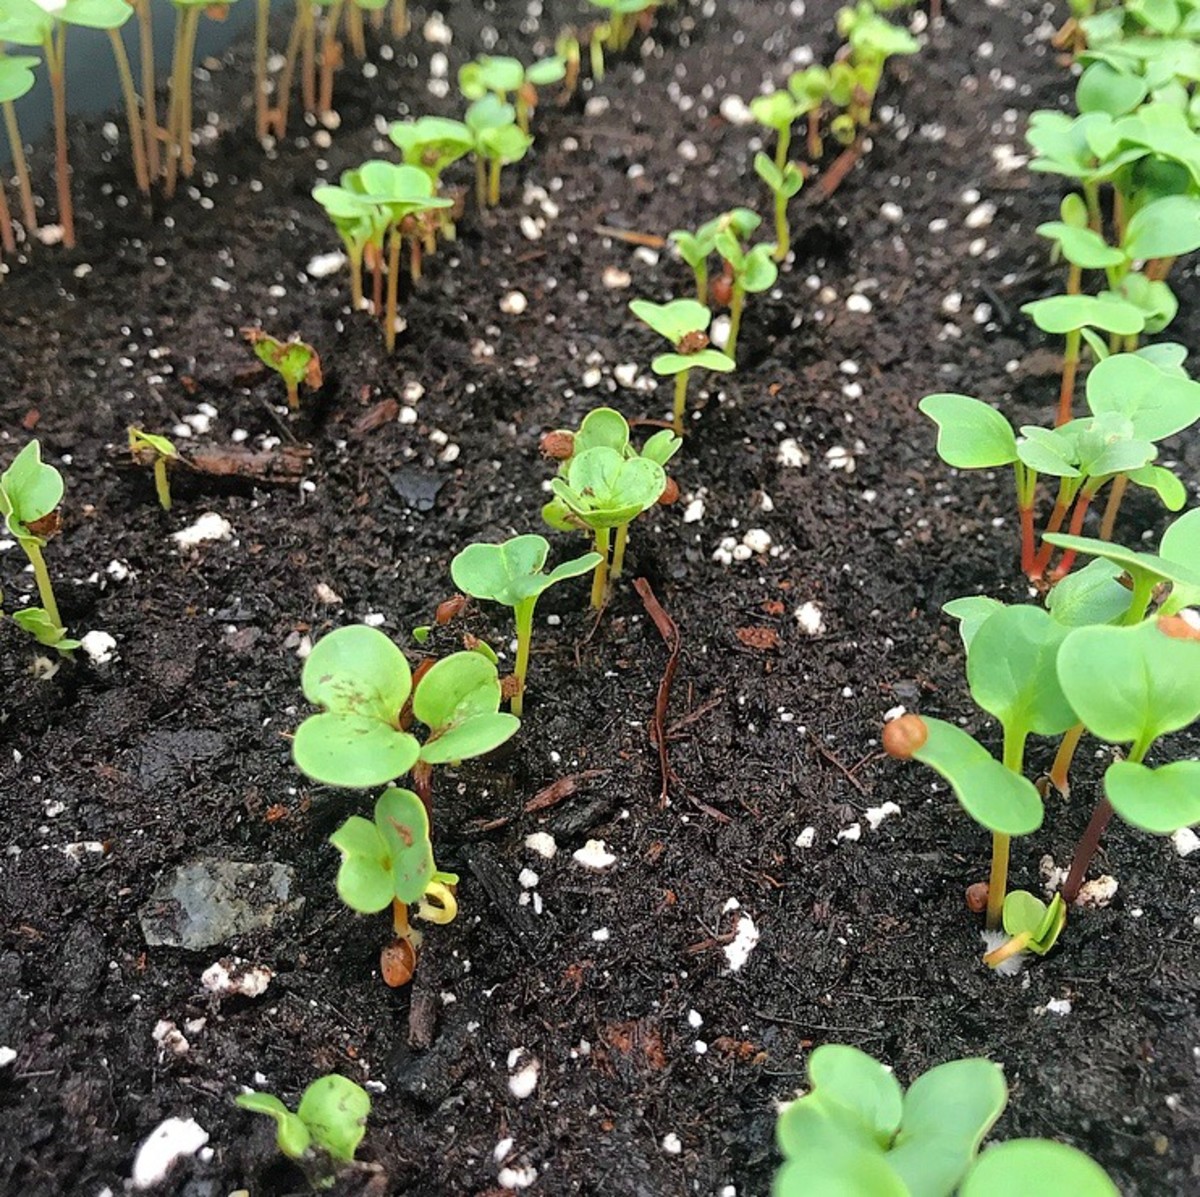 Fall radishes planted in September; 1 week after direct sowing.